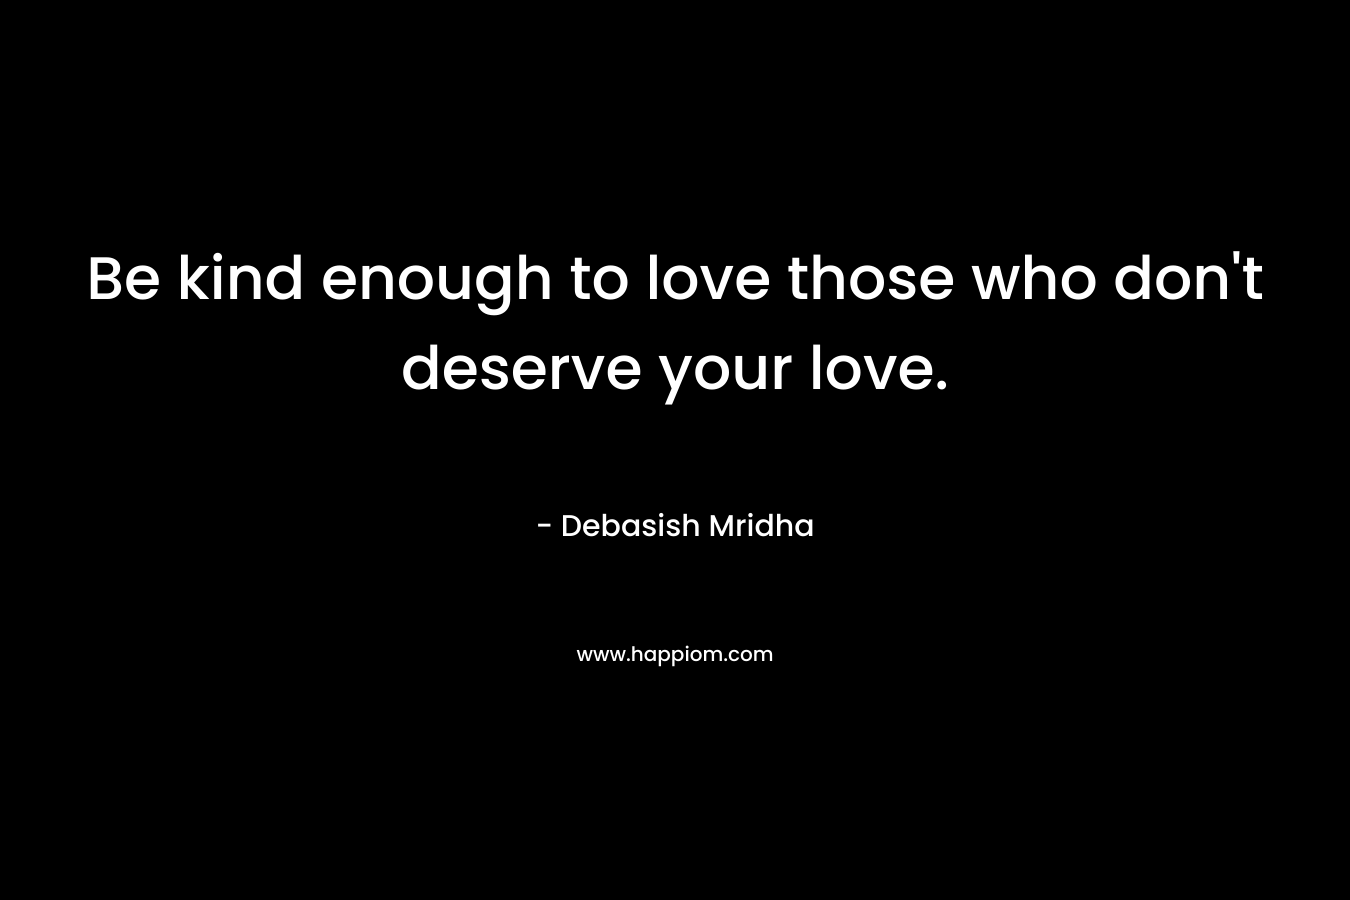 Be kind enough to love those who don't deserve your love.